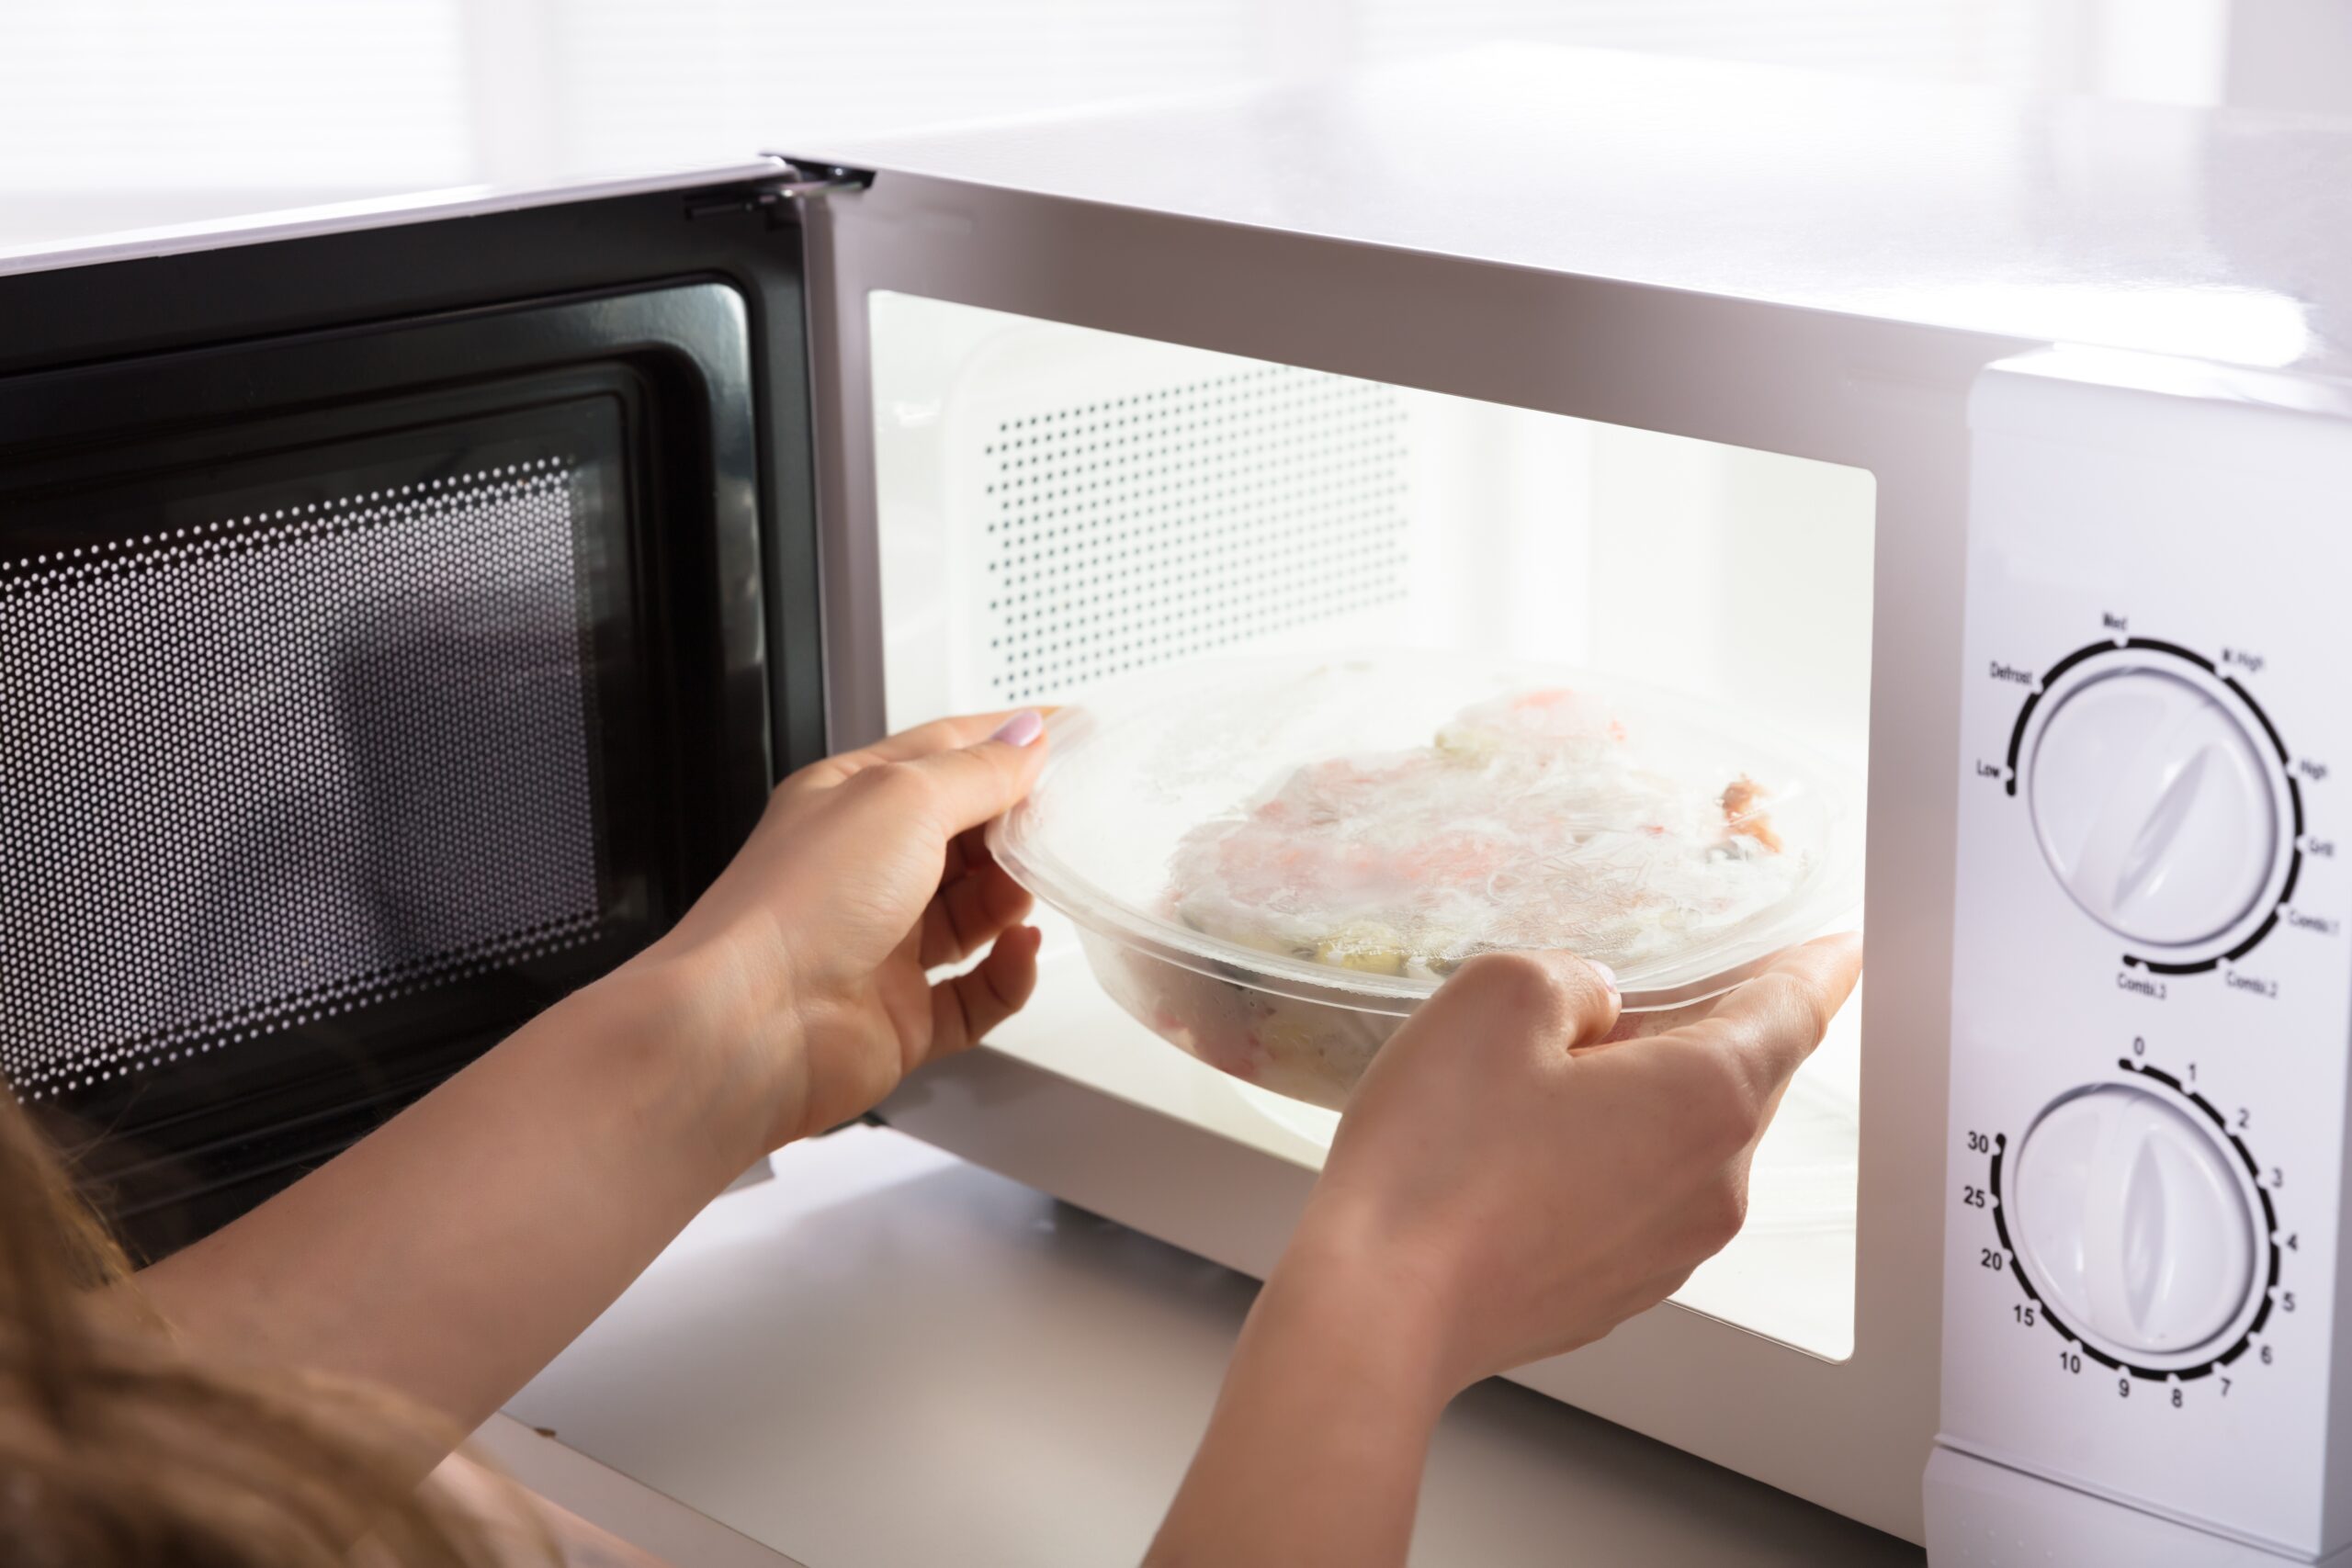 Close-up Of A Woman's Hand Heating Food In Microwave Oven